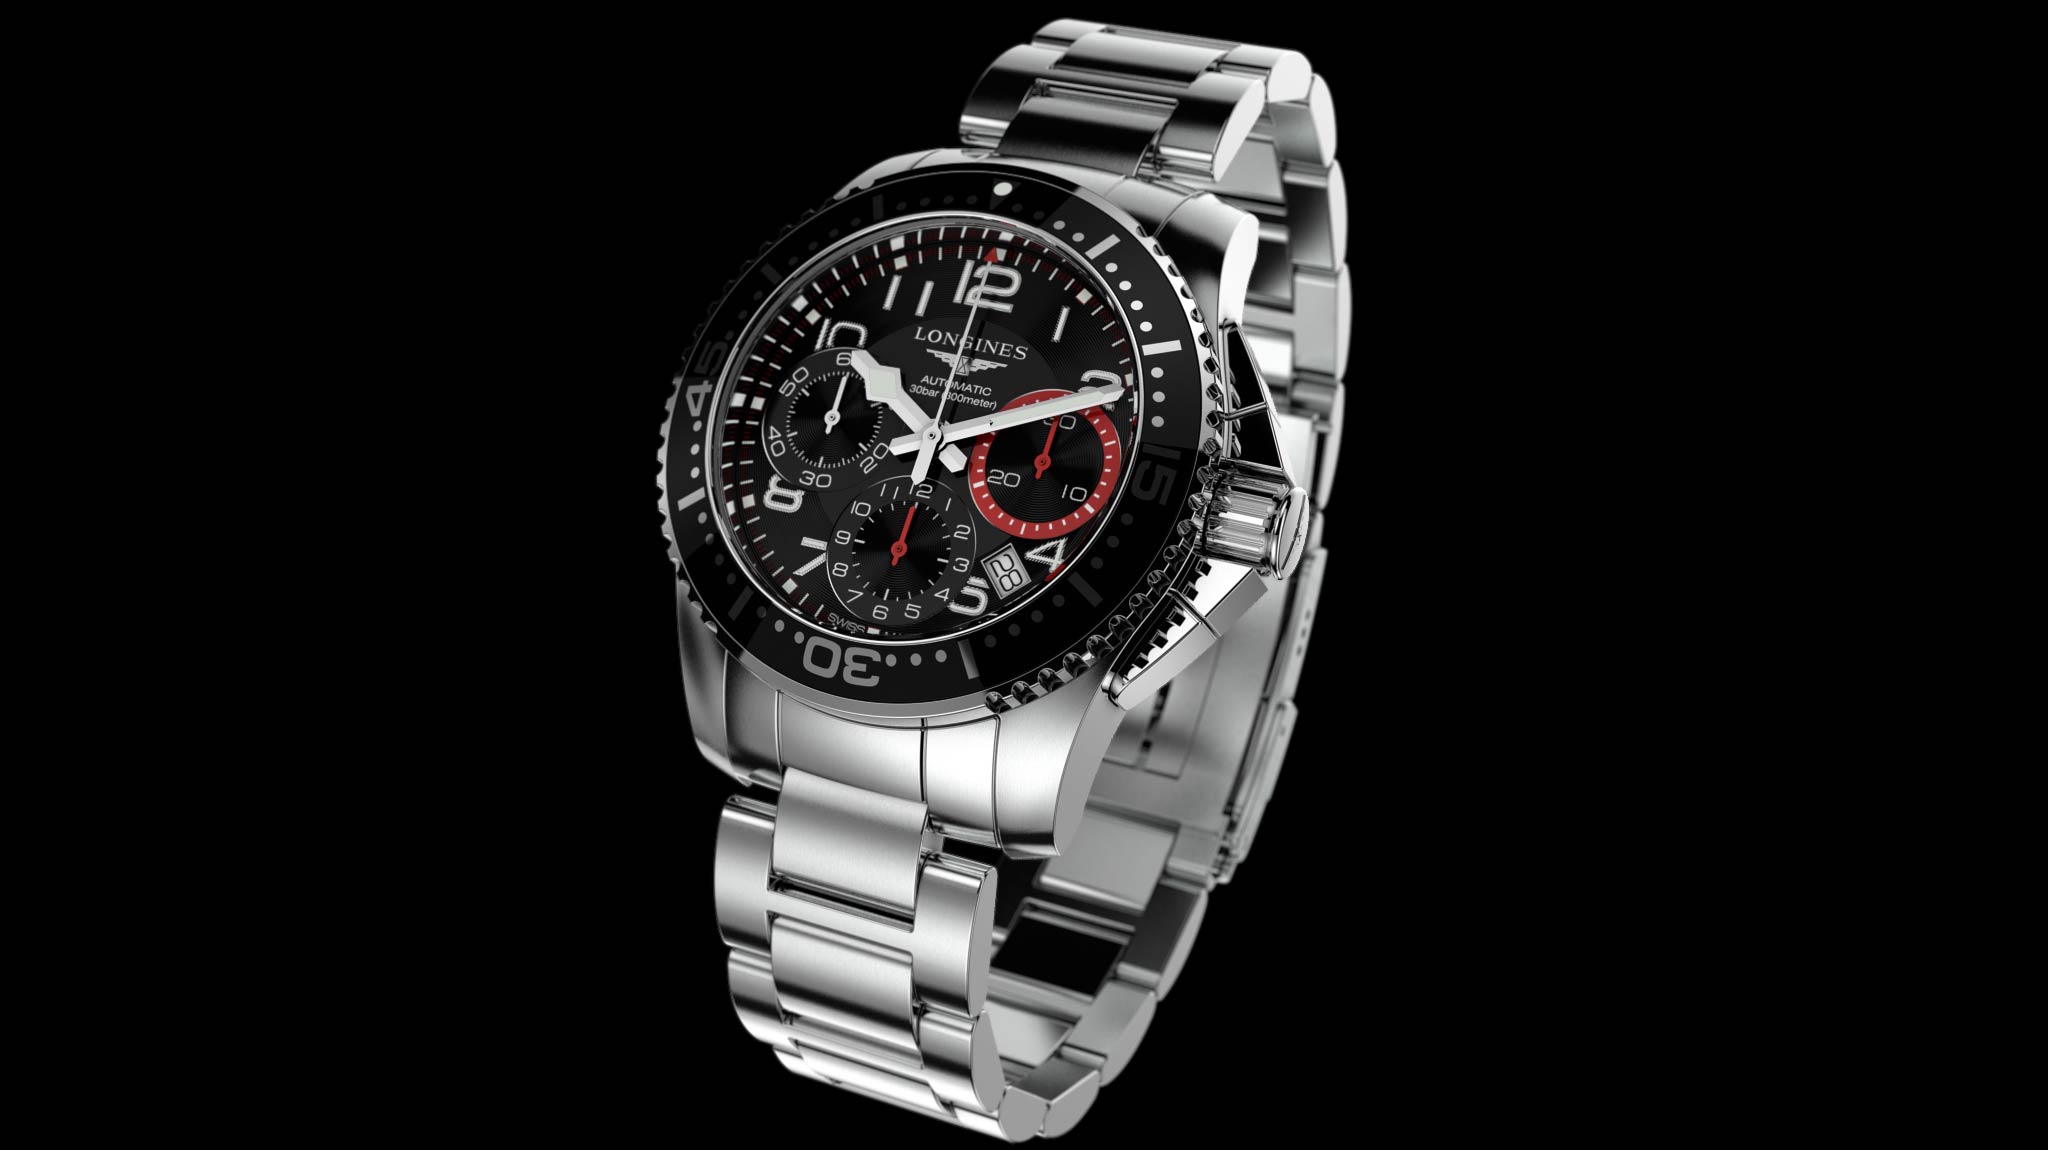 3DVISION NYVALIS 2014 LONGINES HydroConquest 01